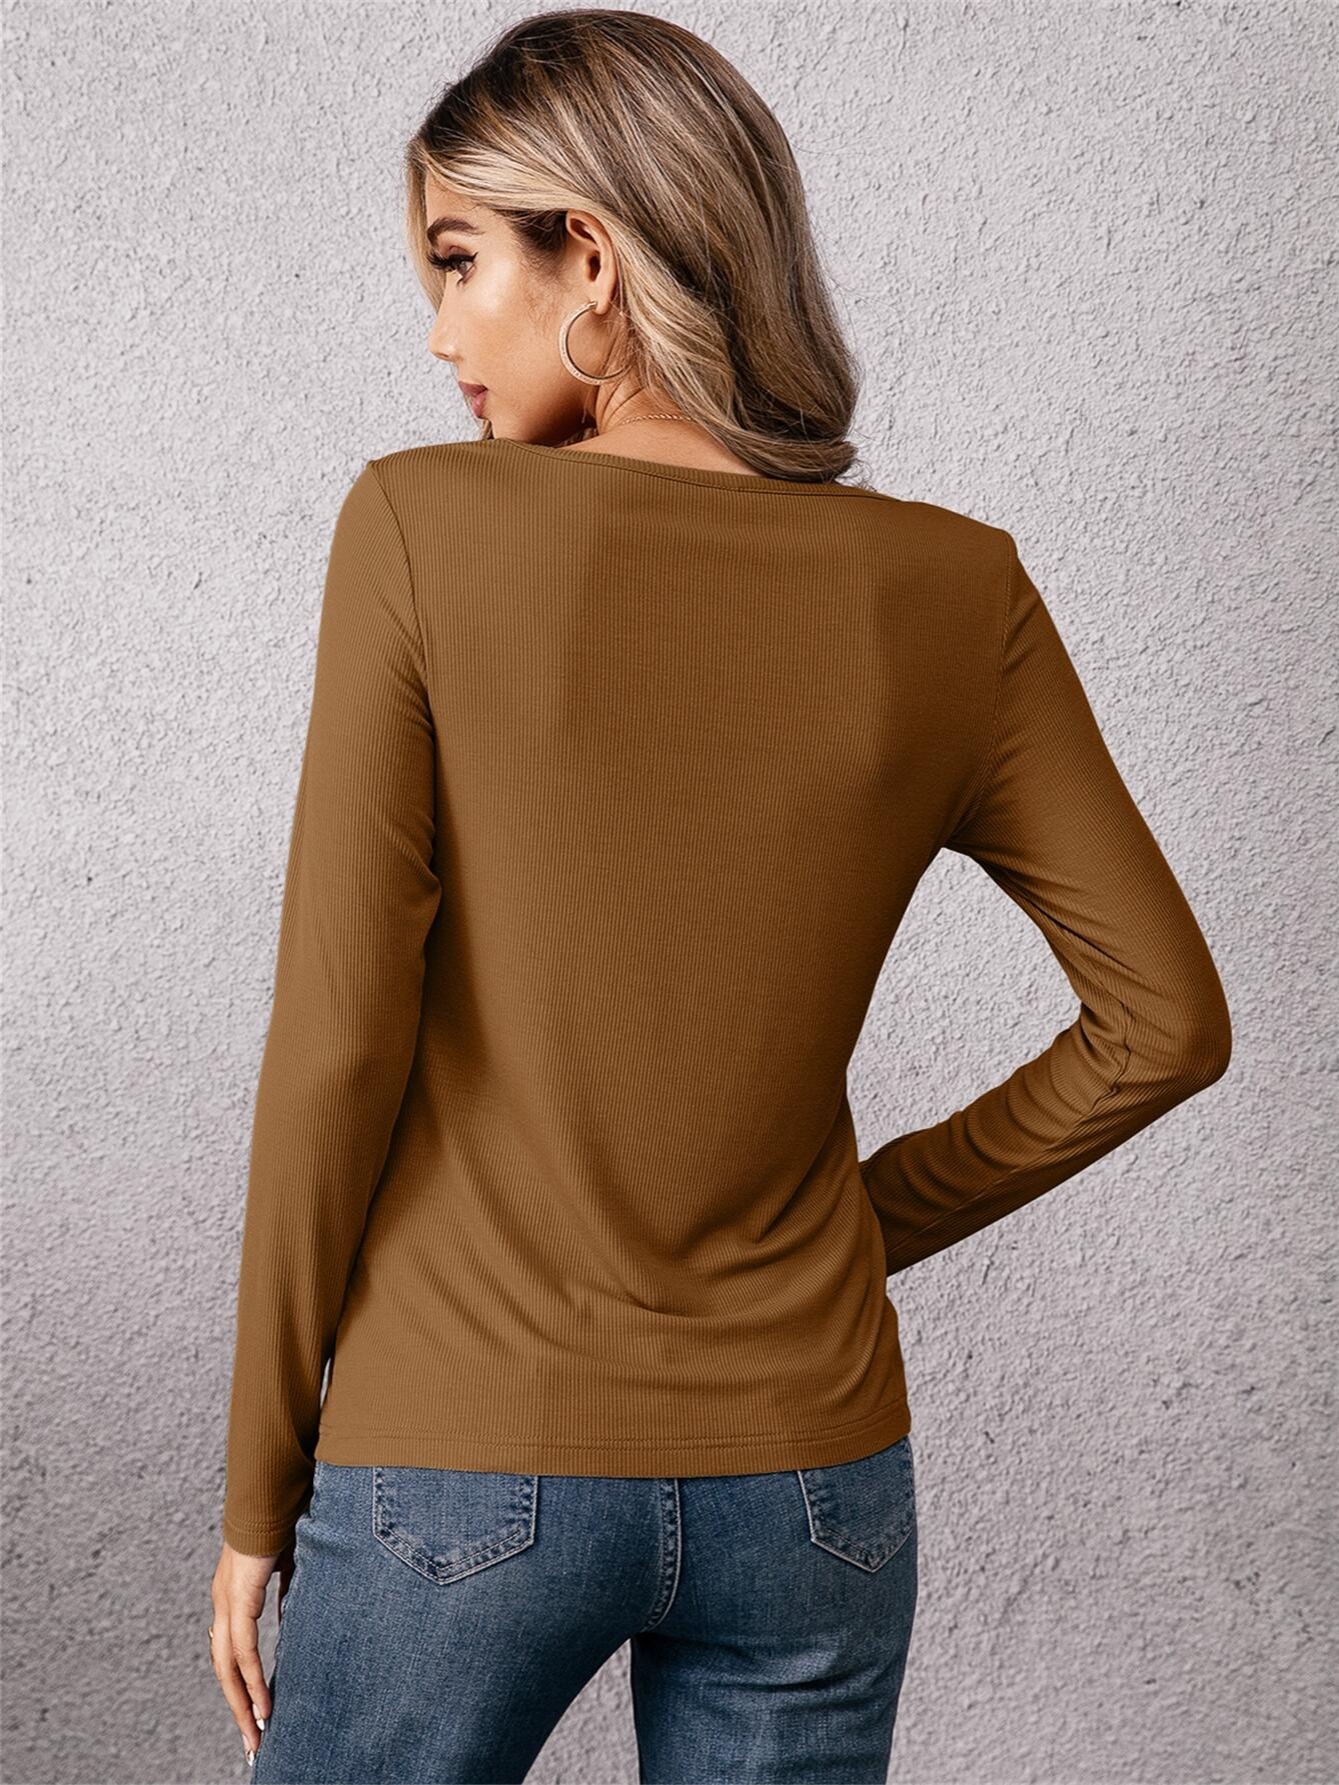 Tejiojio Women Casual Solid Color Lapel Neck Long Sleeve Loose V-Neck  T-Shirt Blouse Pullover Waffle Basic Tops Sweatshirts Beige at   Women's Clothing store